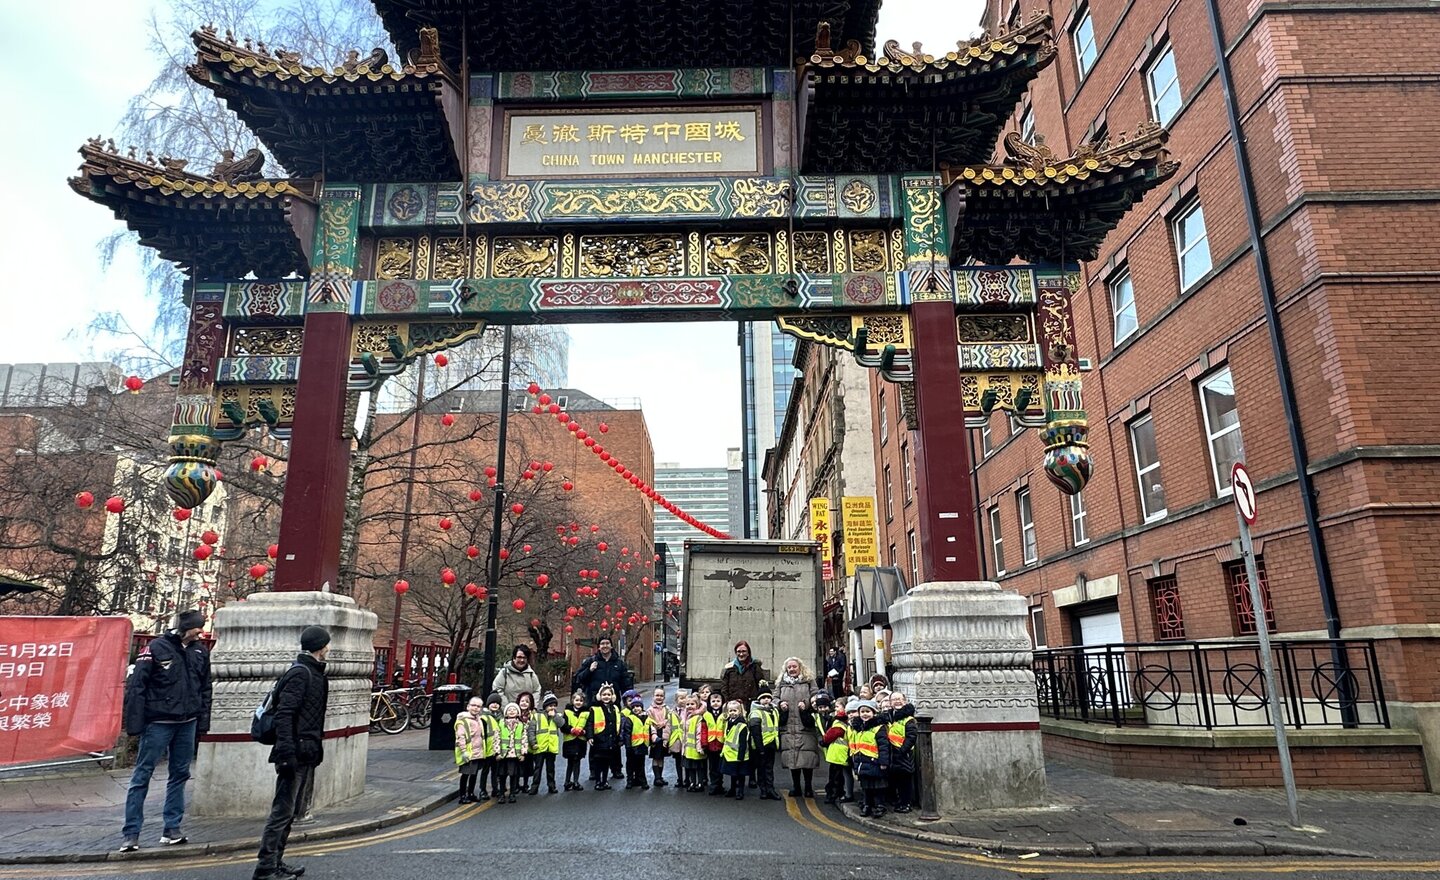 Image of Trip to Chinatown